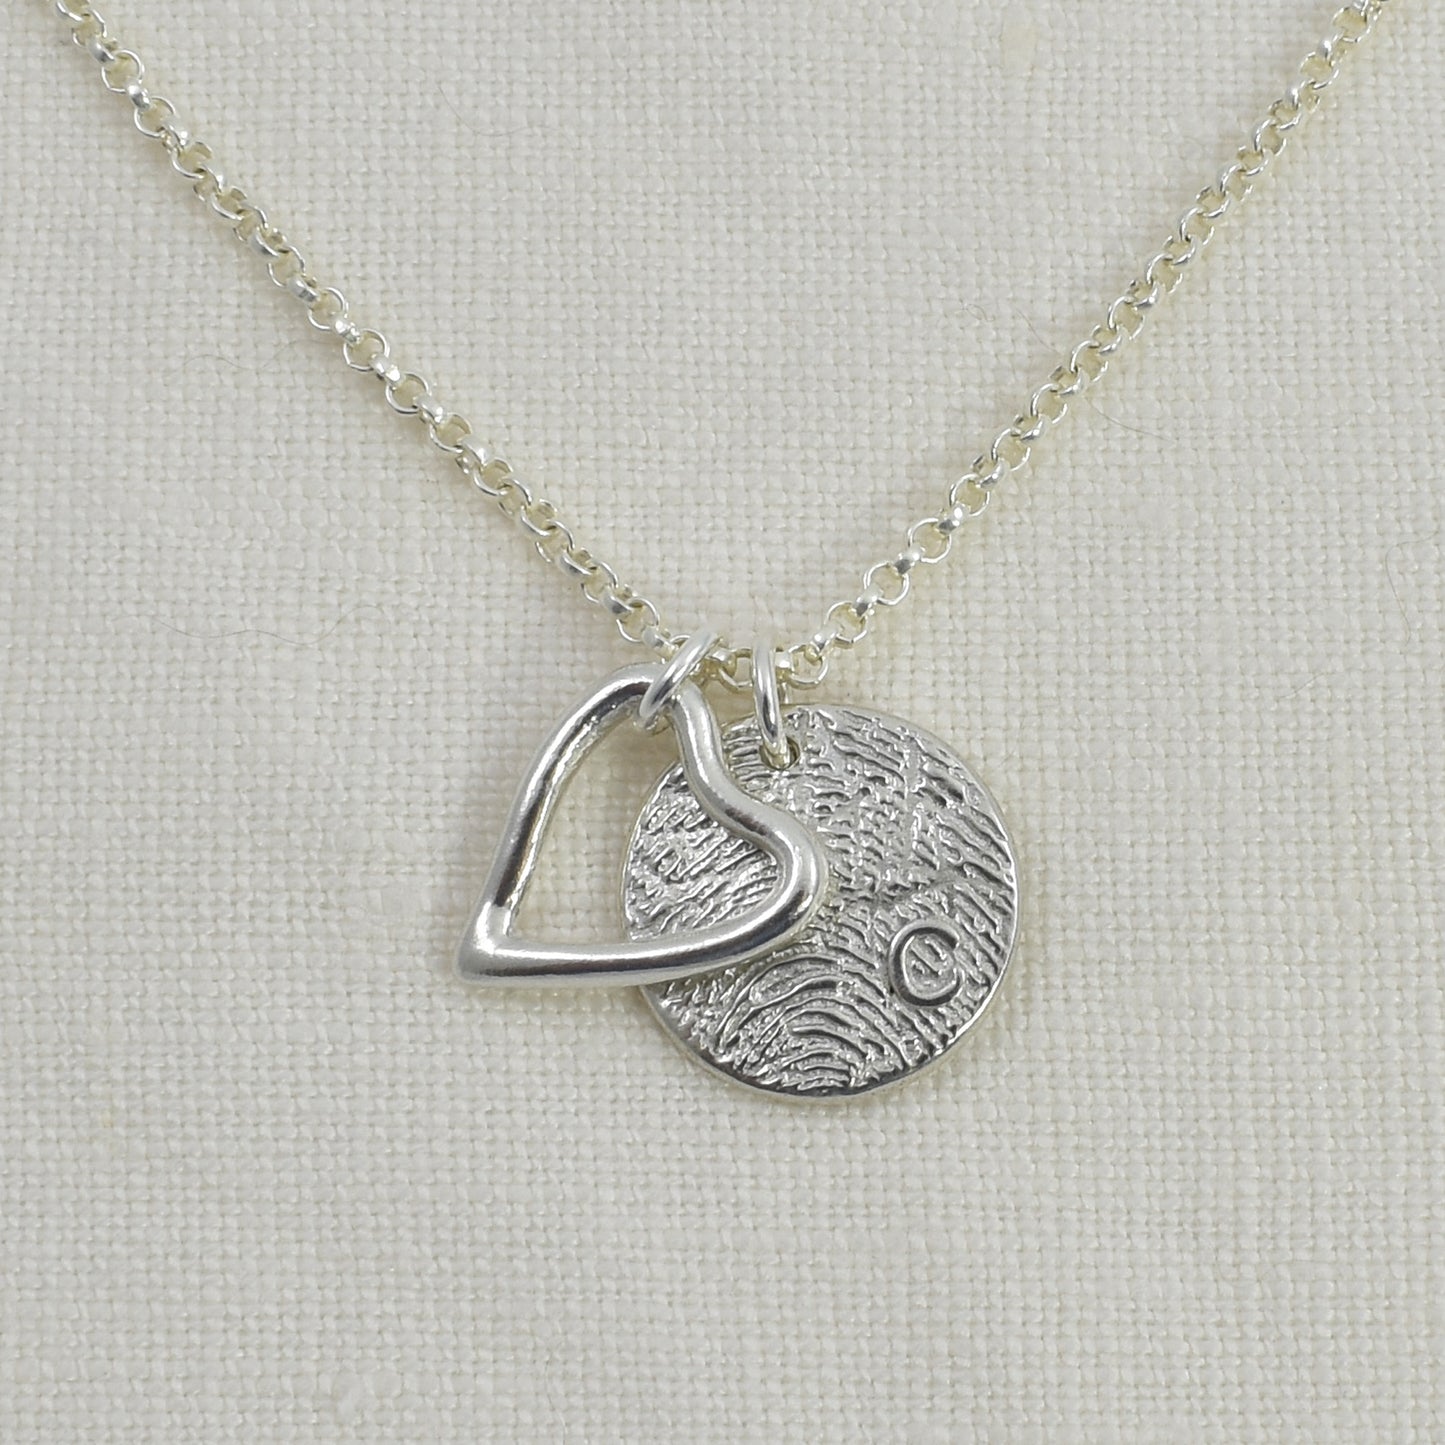 Open Hearts Symbolic Charm Add On Shown on Fingerprint Necklace